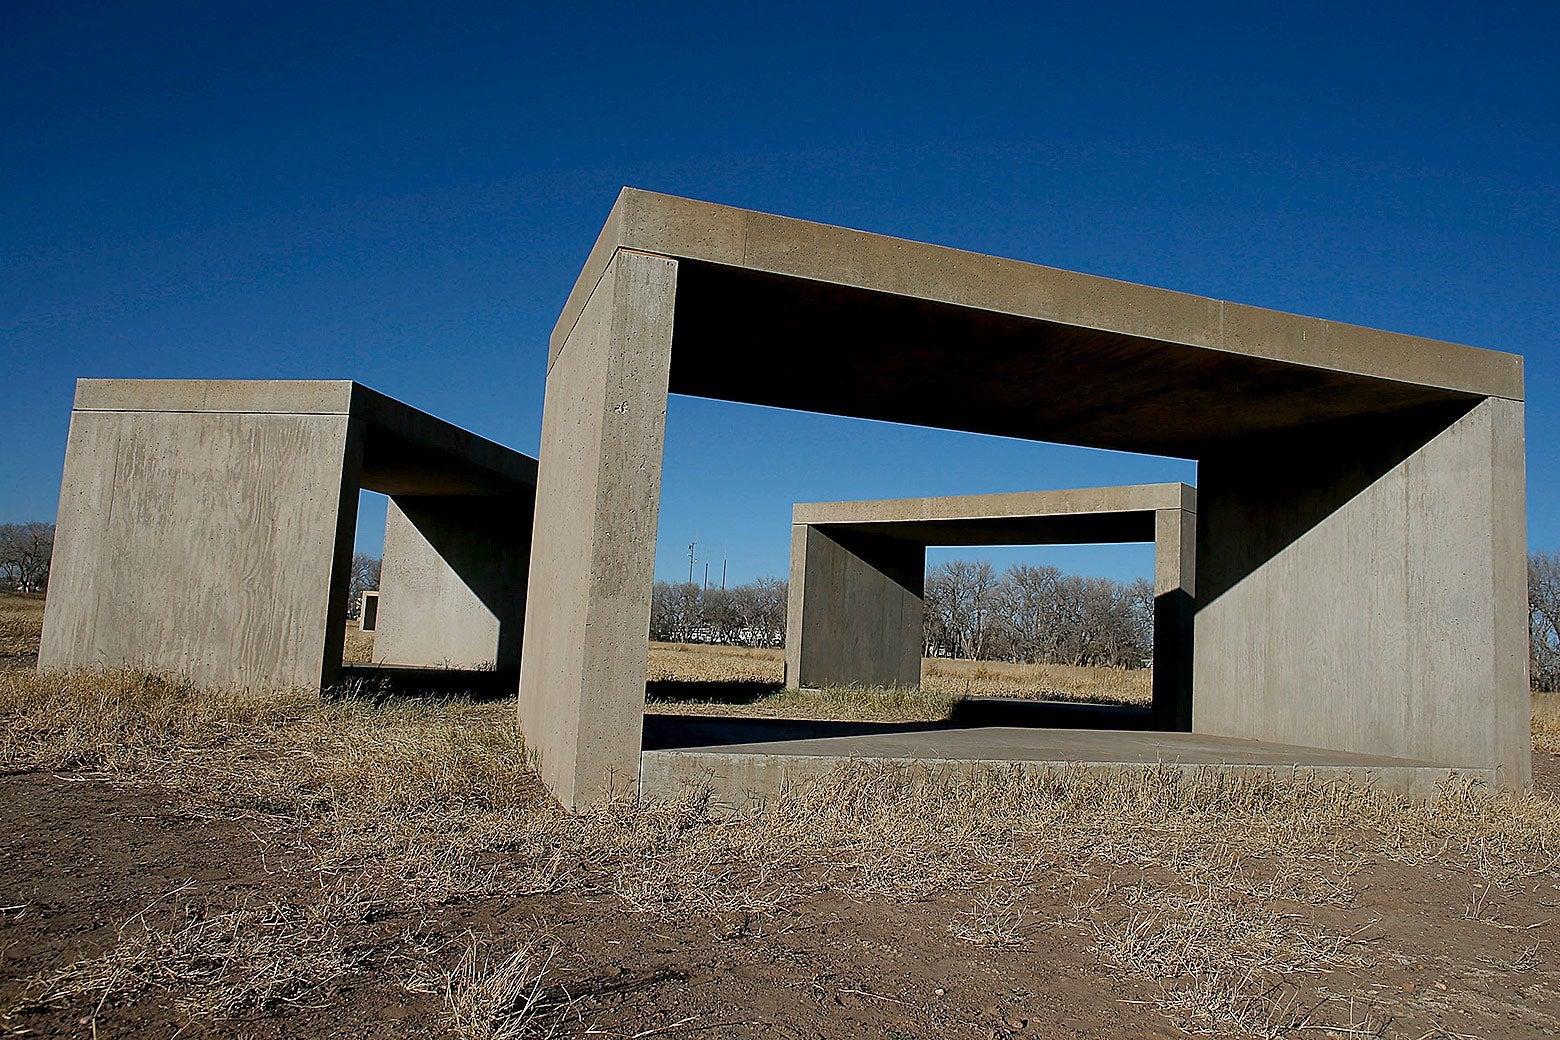 A view of the concrete art works by Donald Judd that run along the border of Chinati's Foundation property on Dec. 26, 2012 in Marfa, Texas.